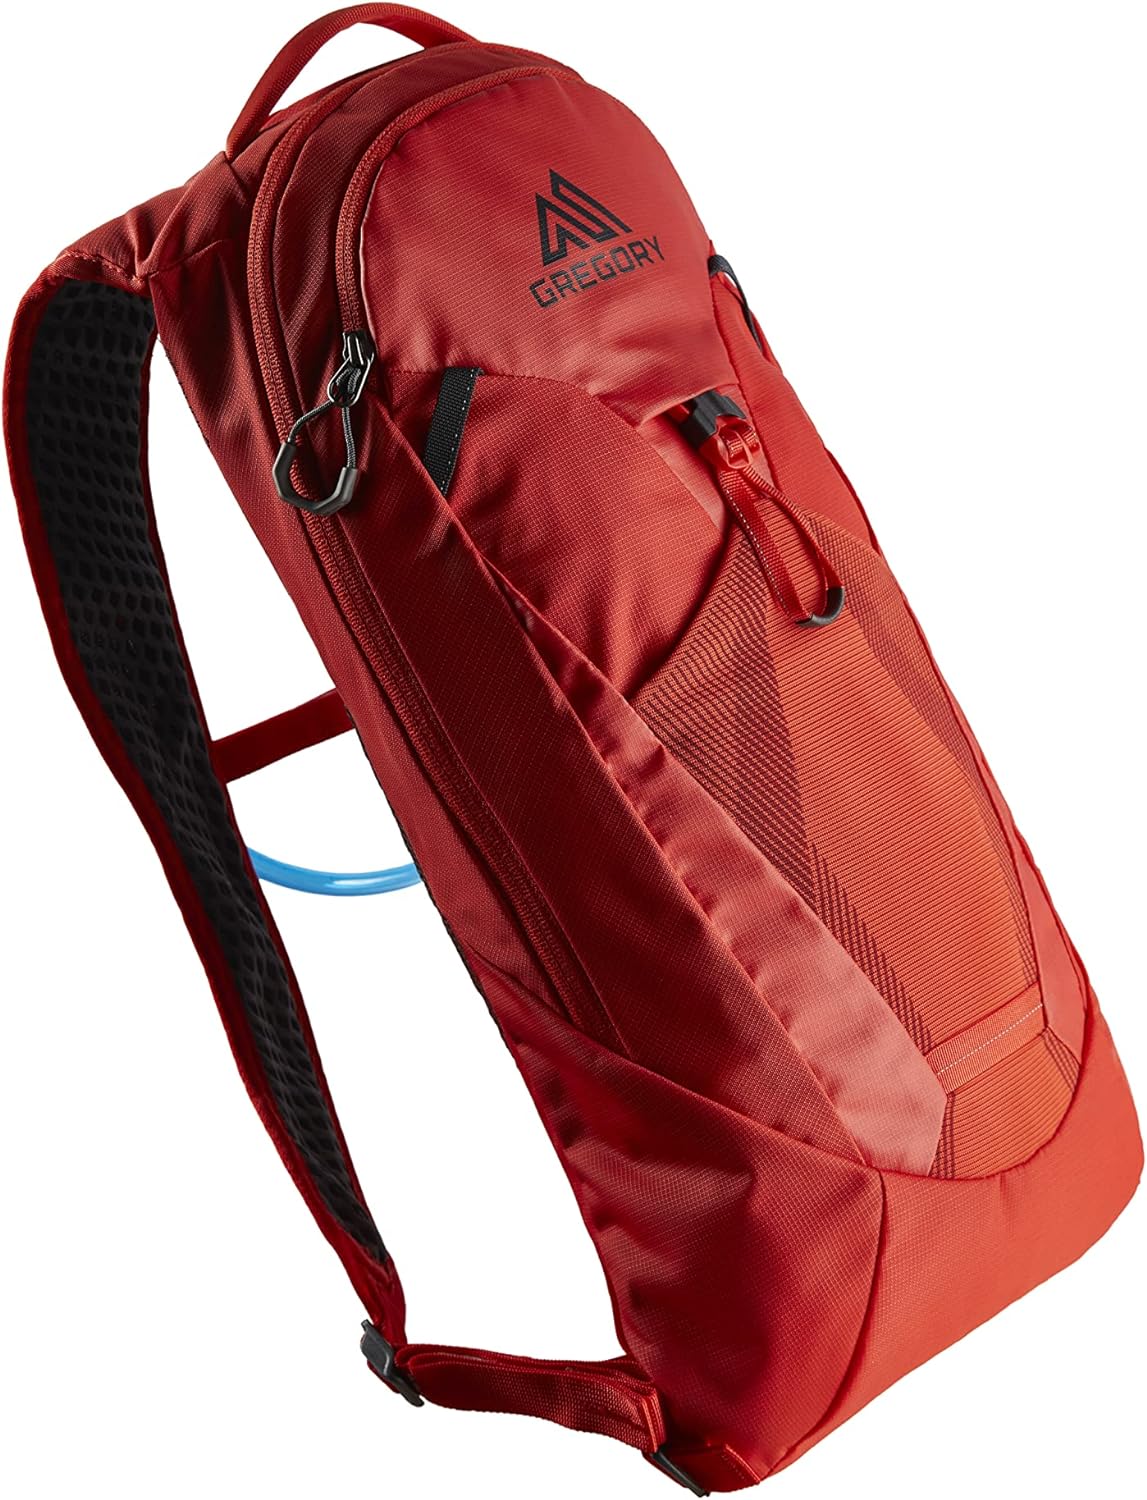 NEW - Gregory Mountain Products Tempo 6 H2O Hiking Backpack - Retail $119